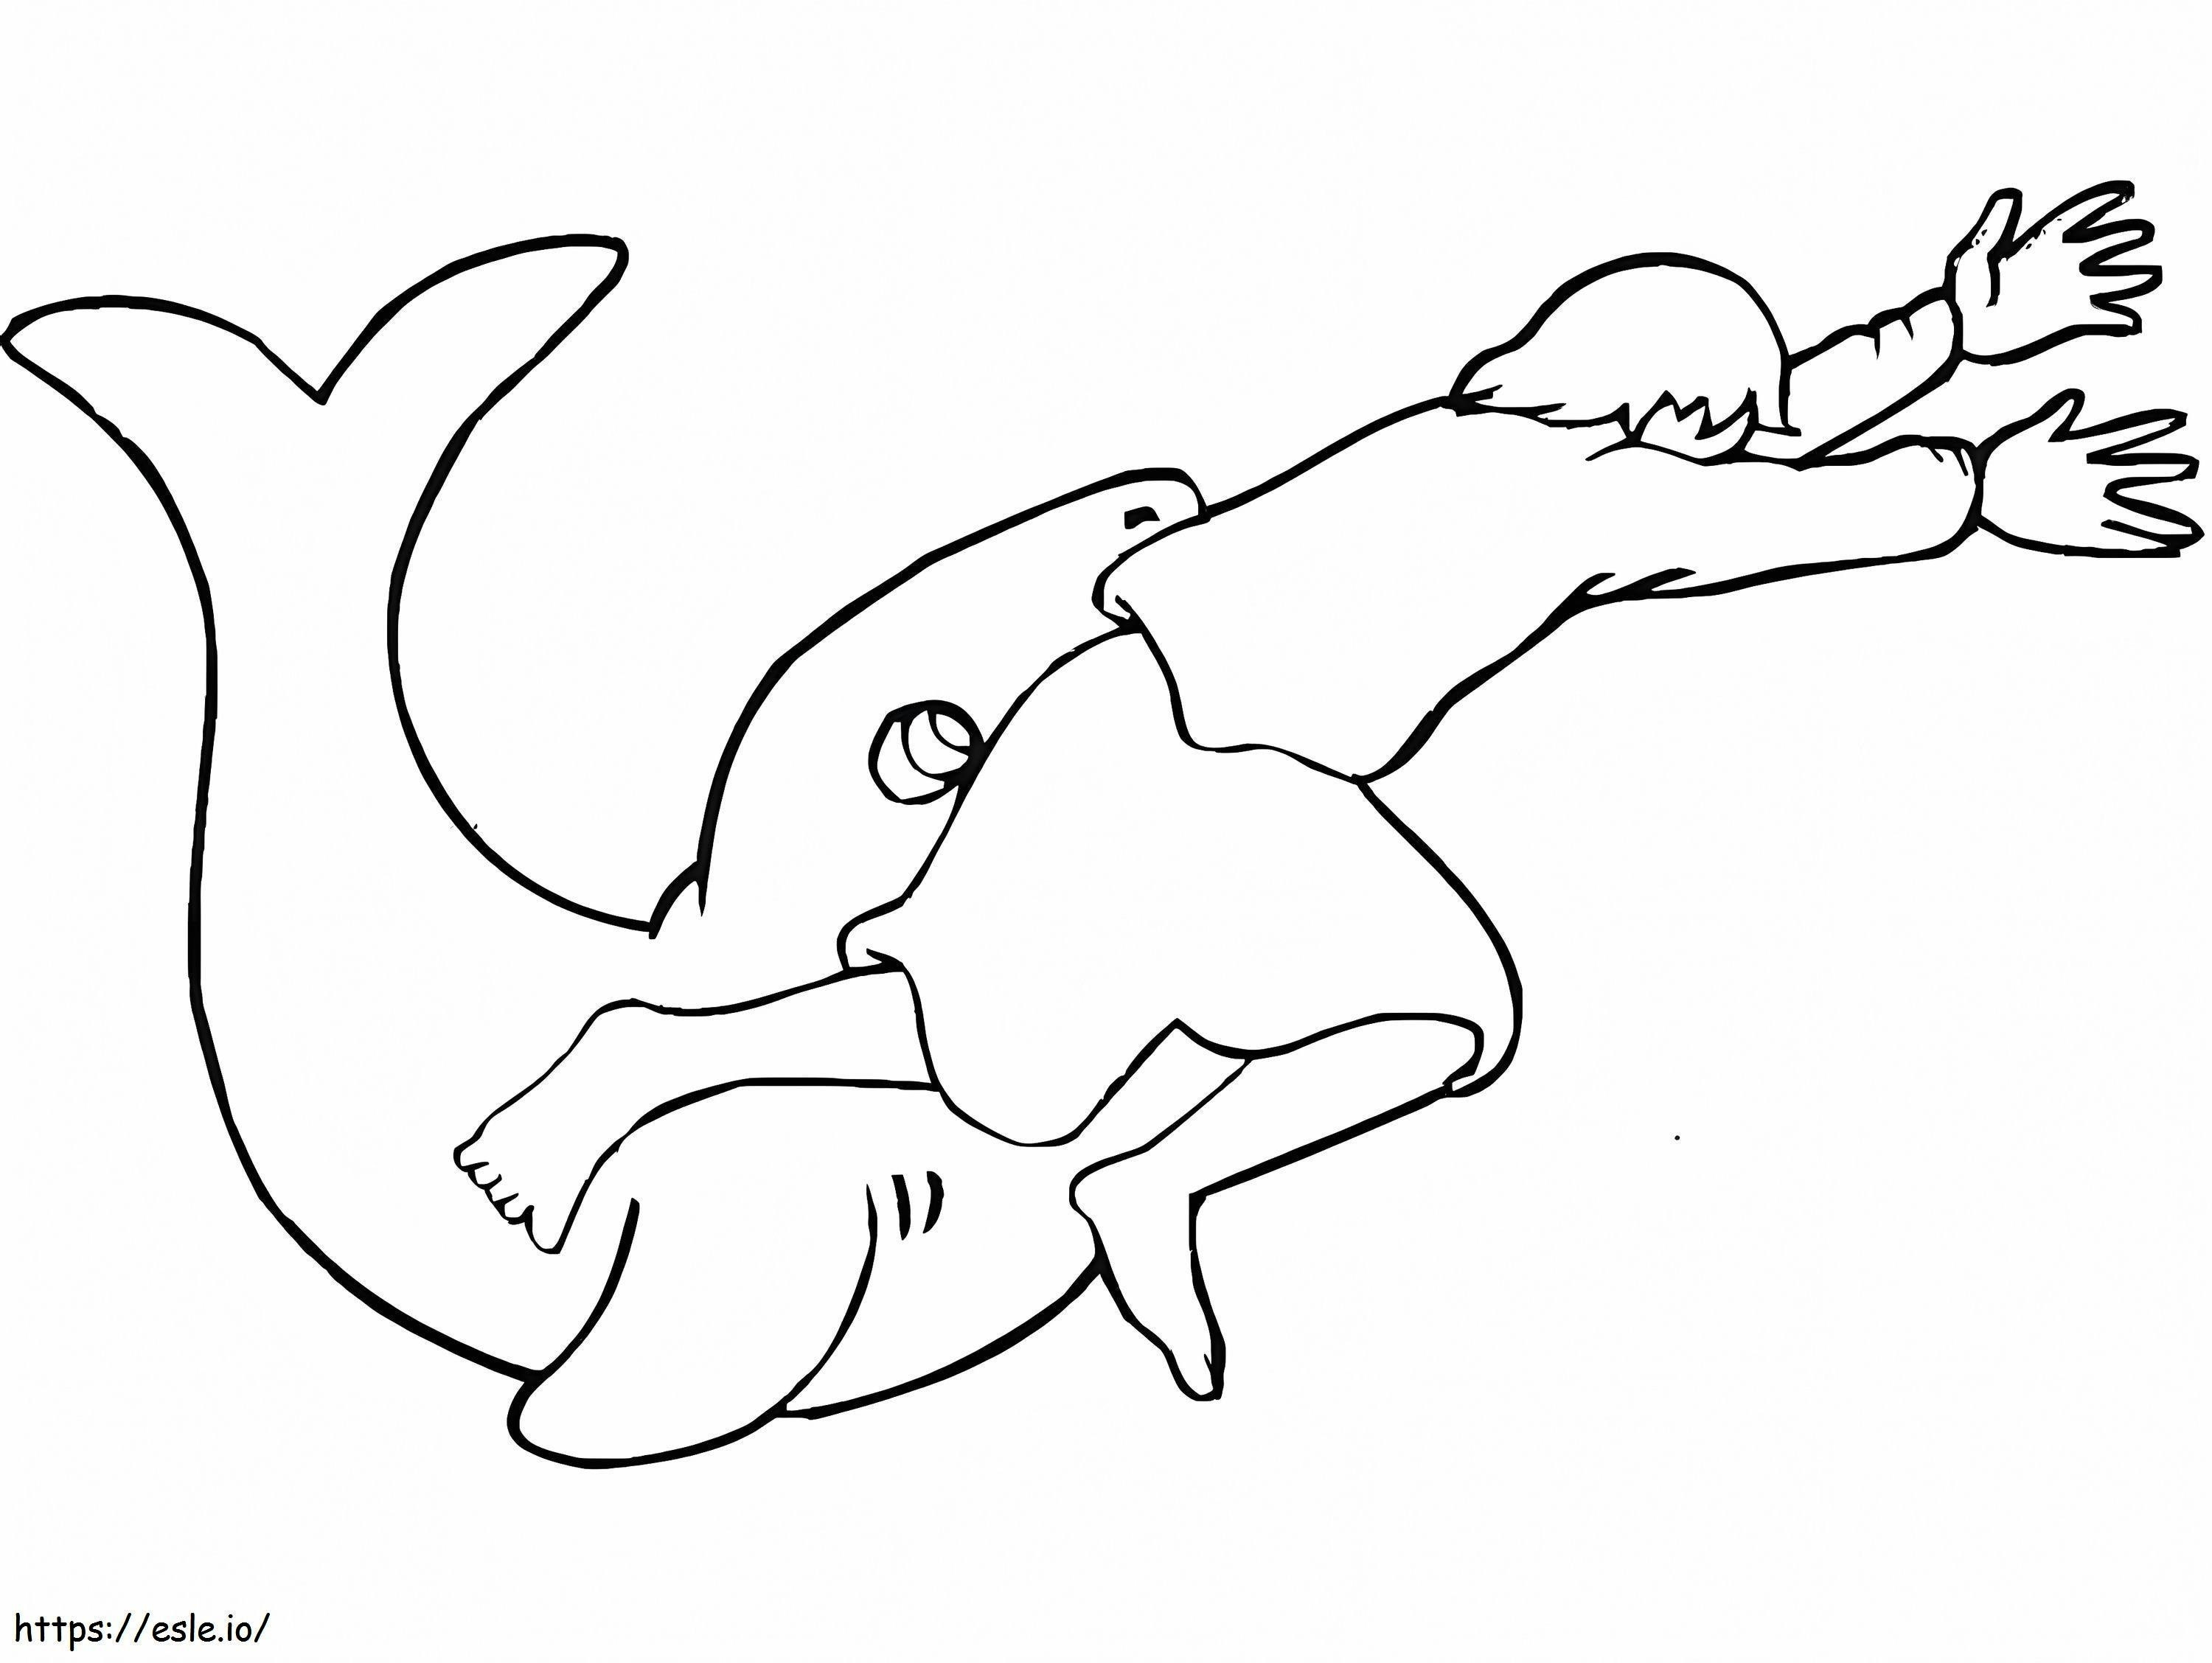 Story Of Jonah And Whale coloring page